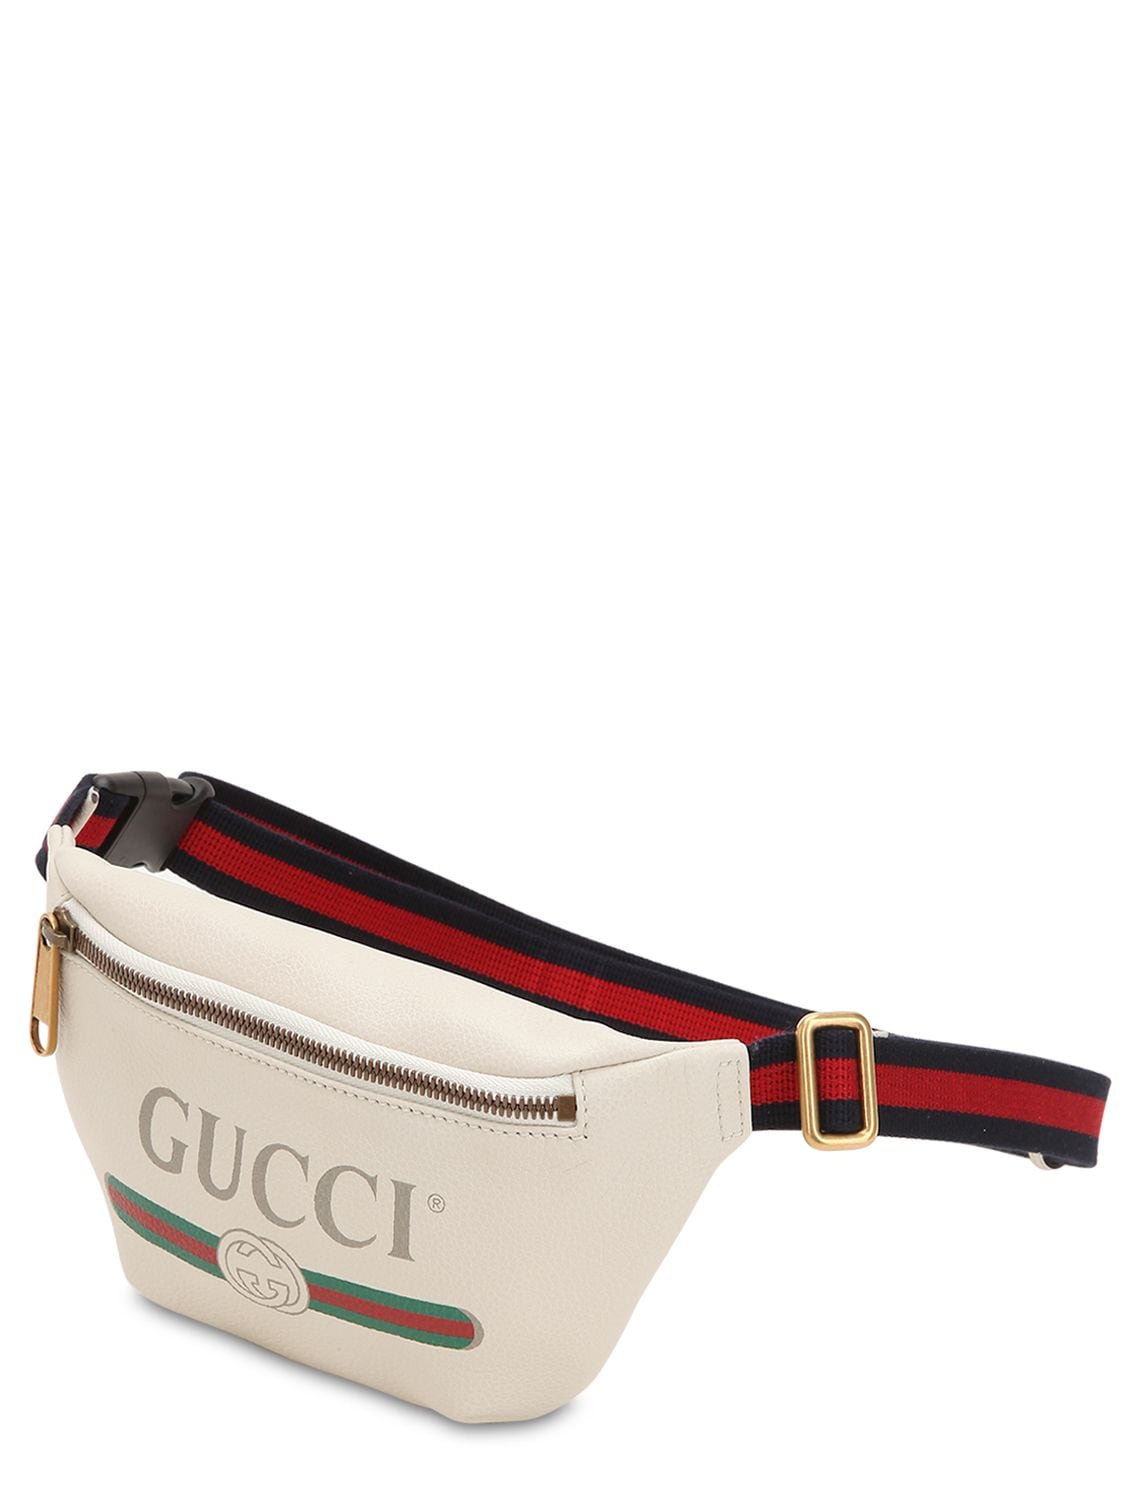 Gucci Small Print Leather Belt Bag In White | ModeSens